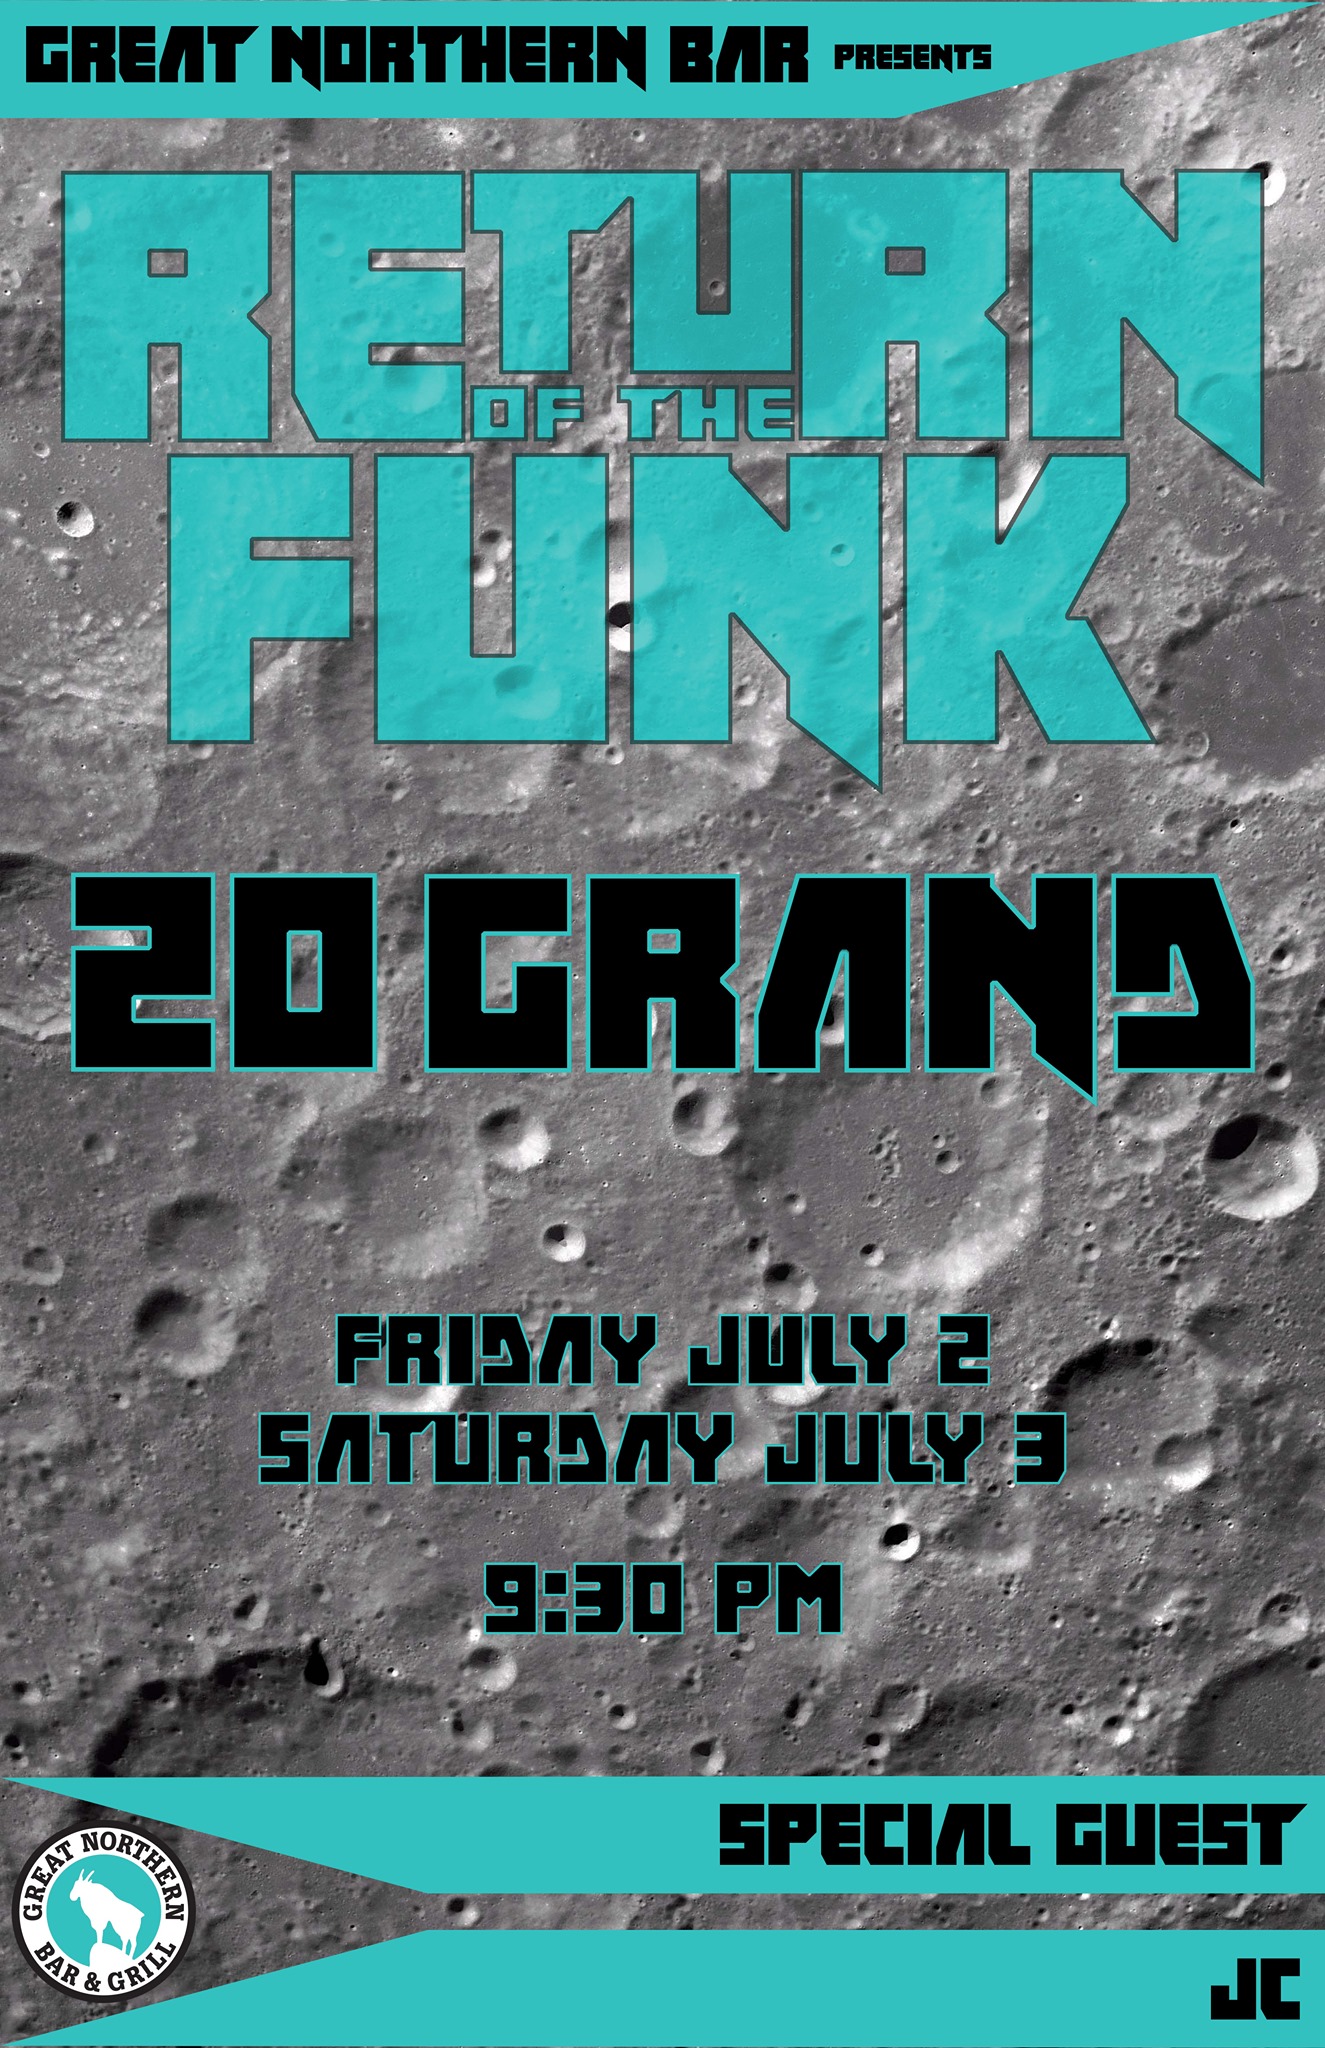 Return of the Funk at Great Northern Bar